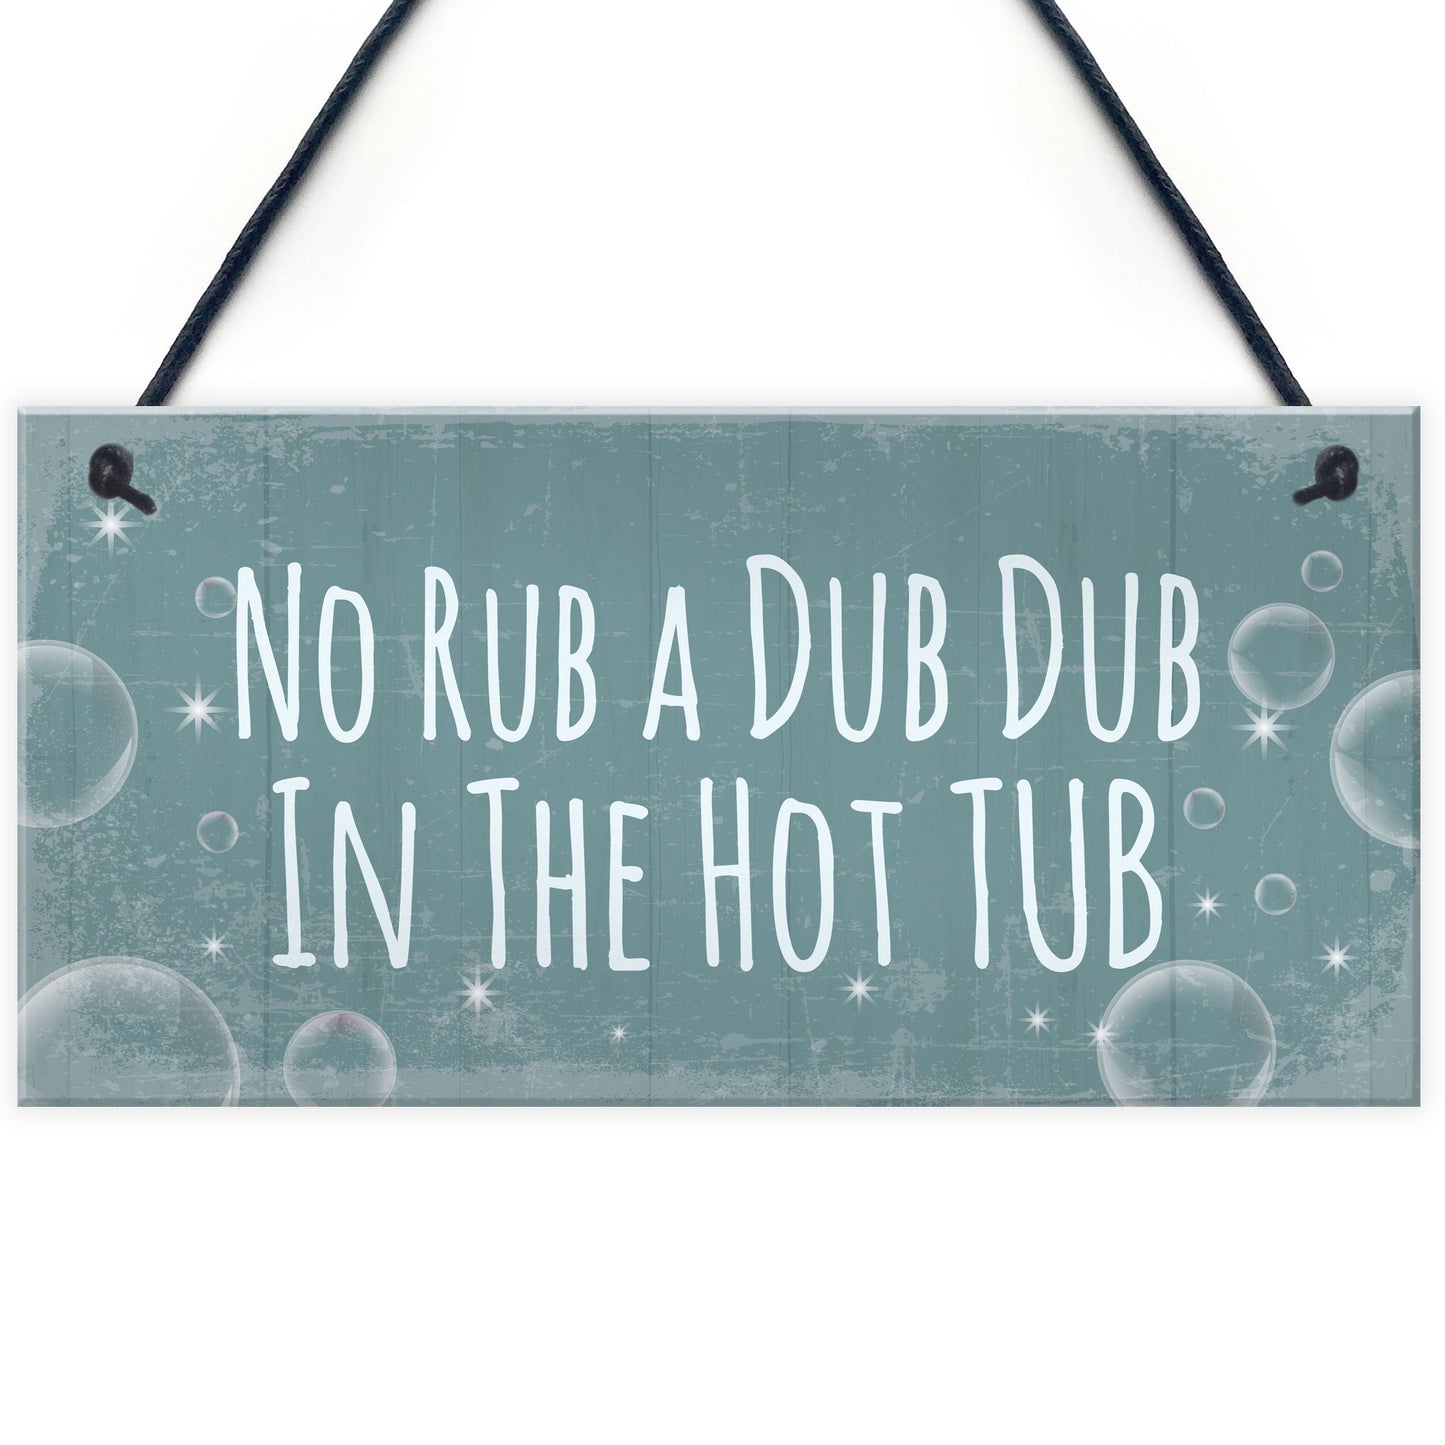 Cheeky Funny Hot Tub Signs Plaque Hanging Garden Sign Shed